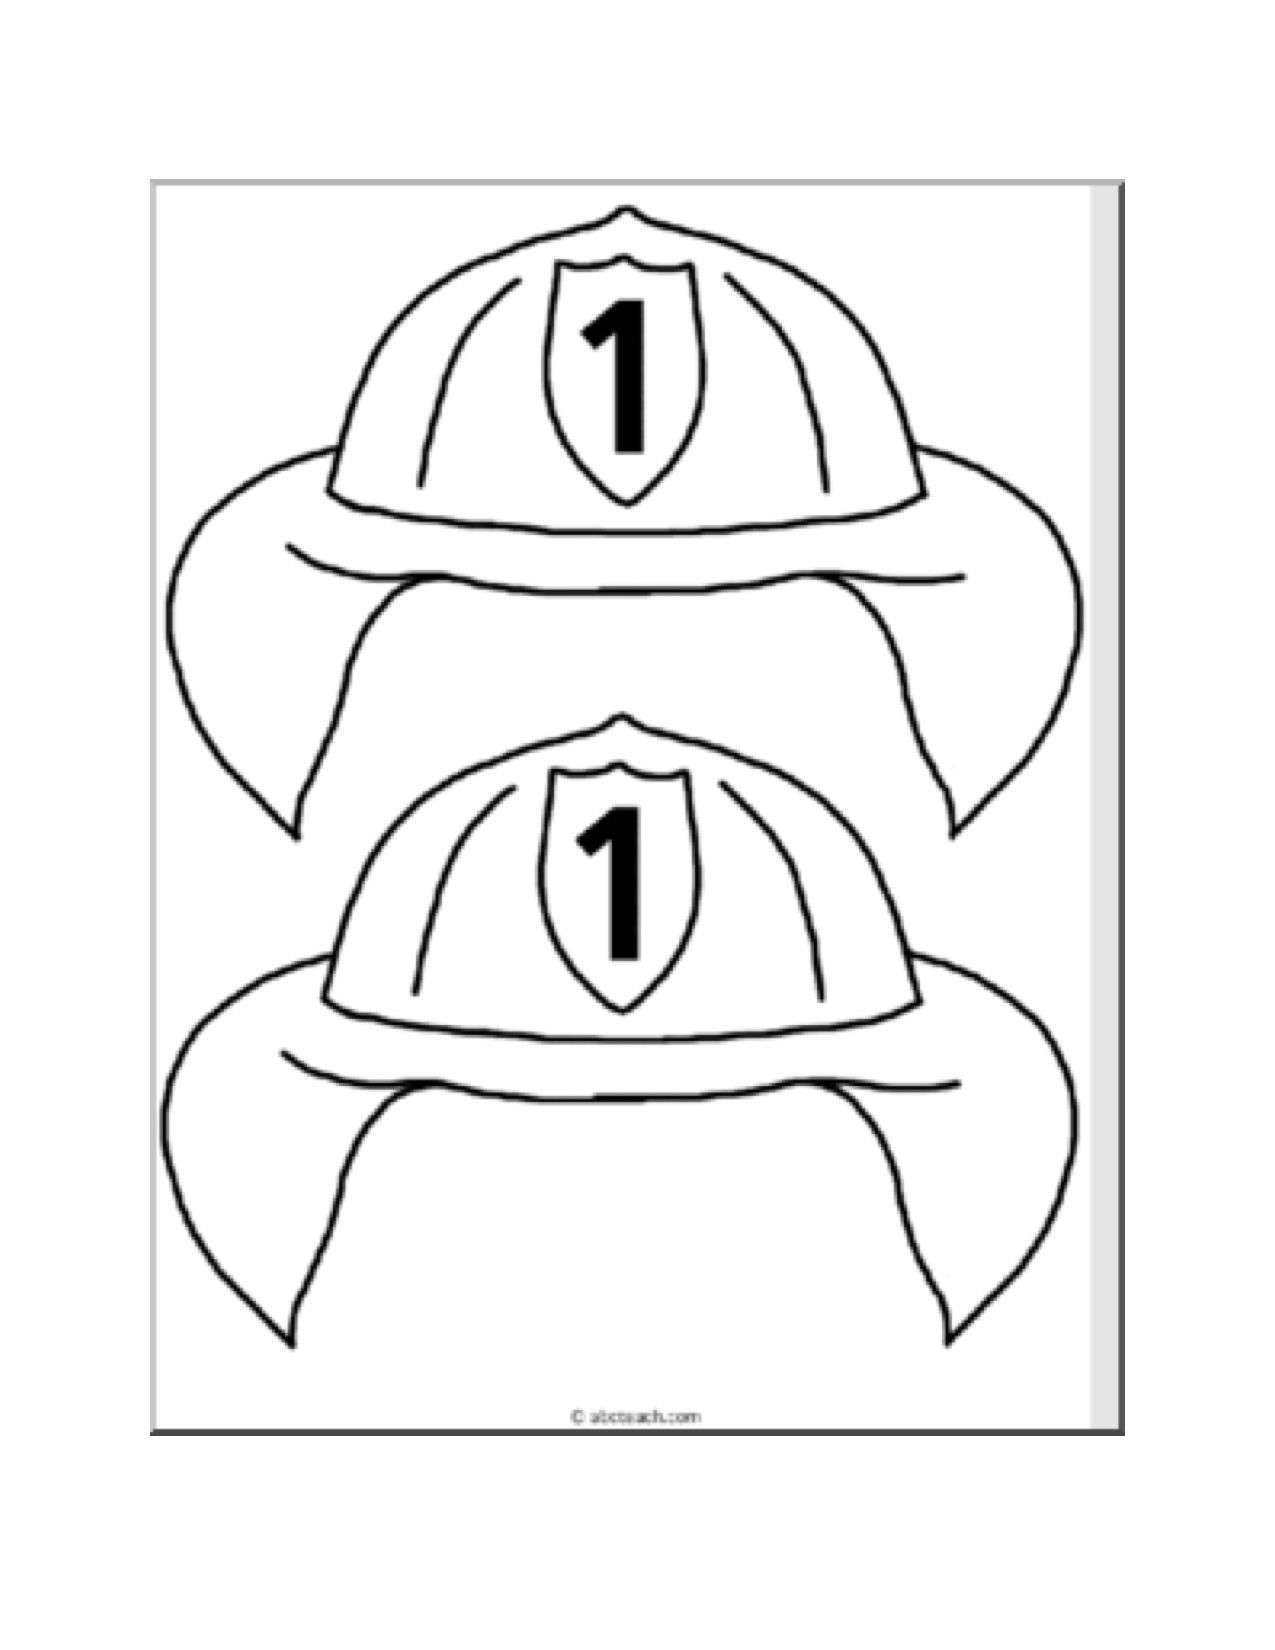 Free Fre Printable Coloring Page Fire Hat Download Free Fre Printable